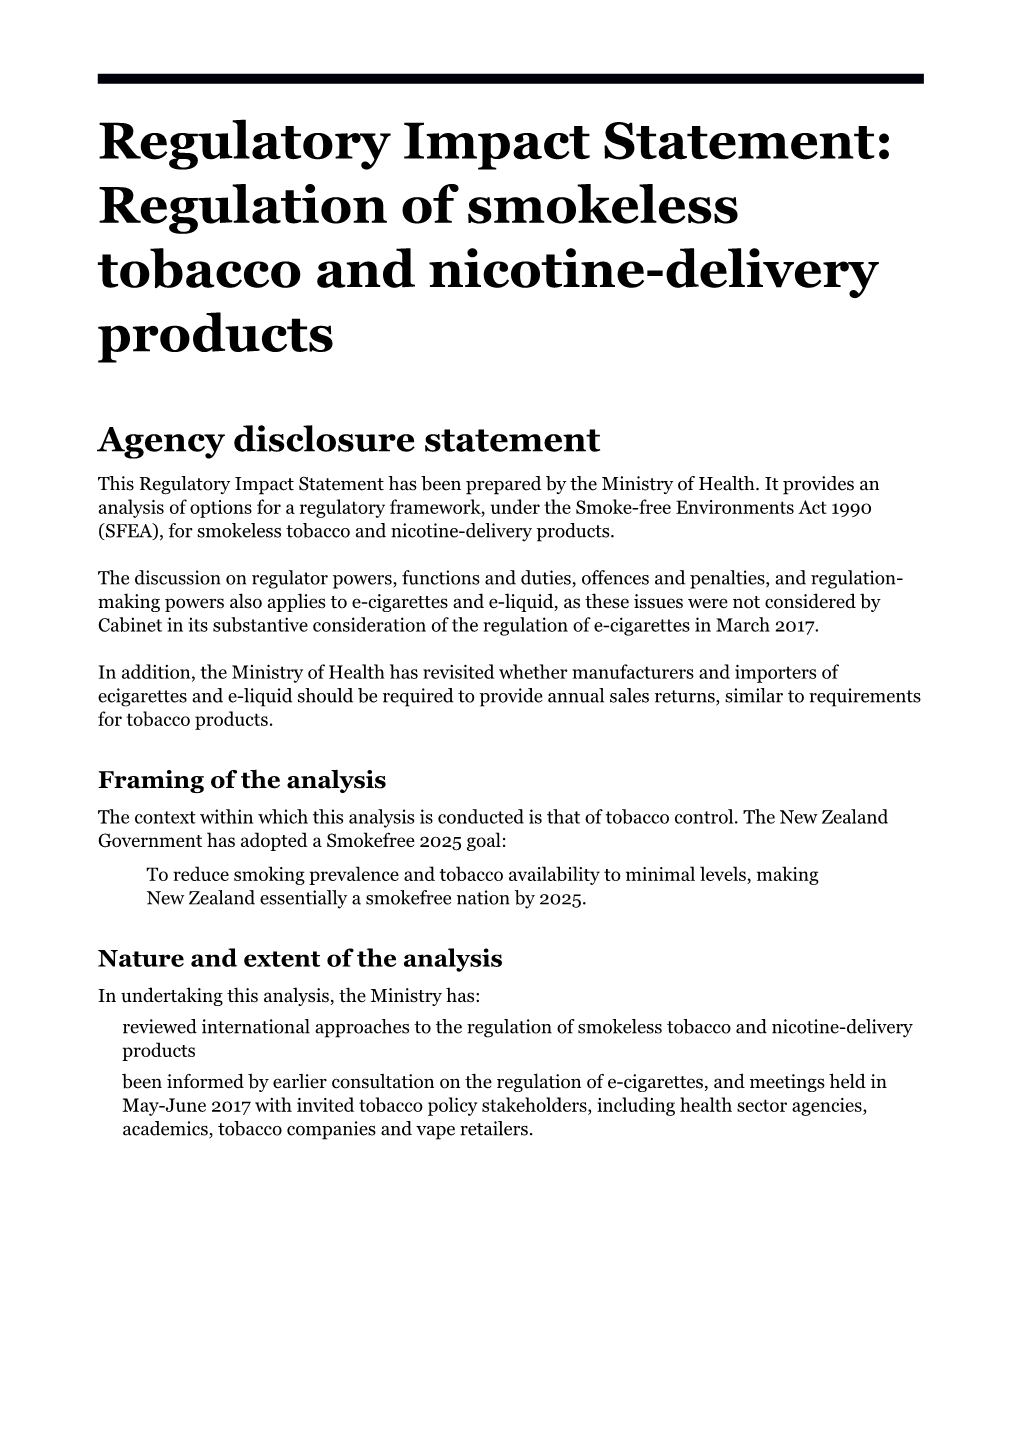 Regulatory Impact Statement: Regulation of Smokeless Tobacco and Nicotine-Delivery Products